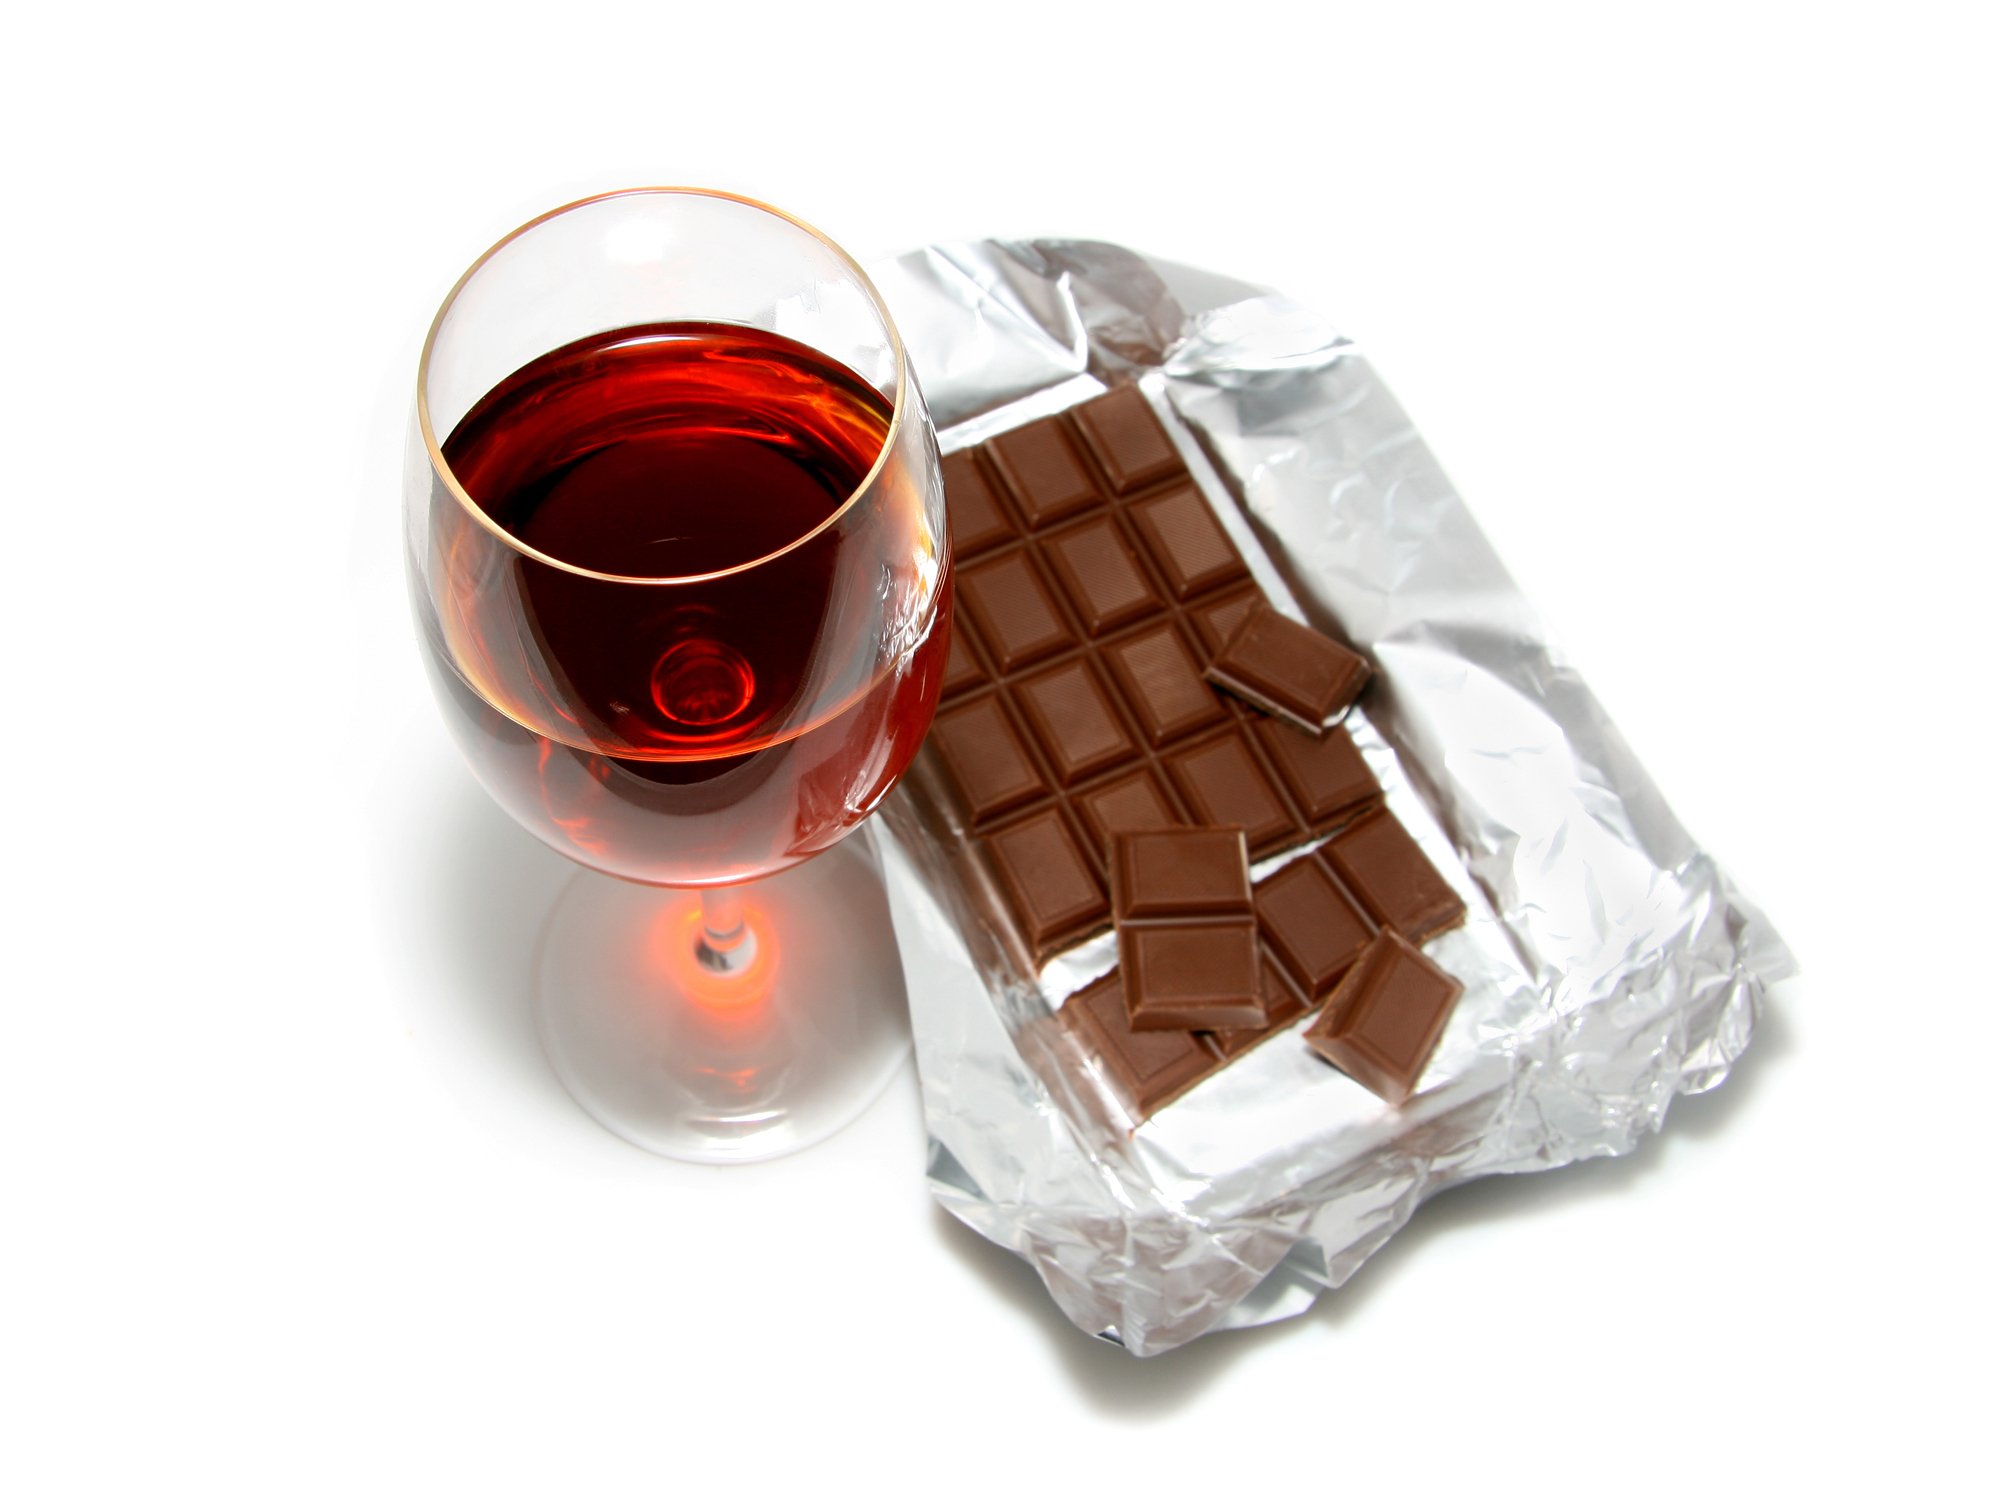 Drink wine and eat chocolate to see better